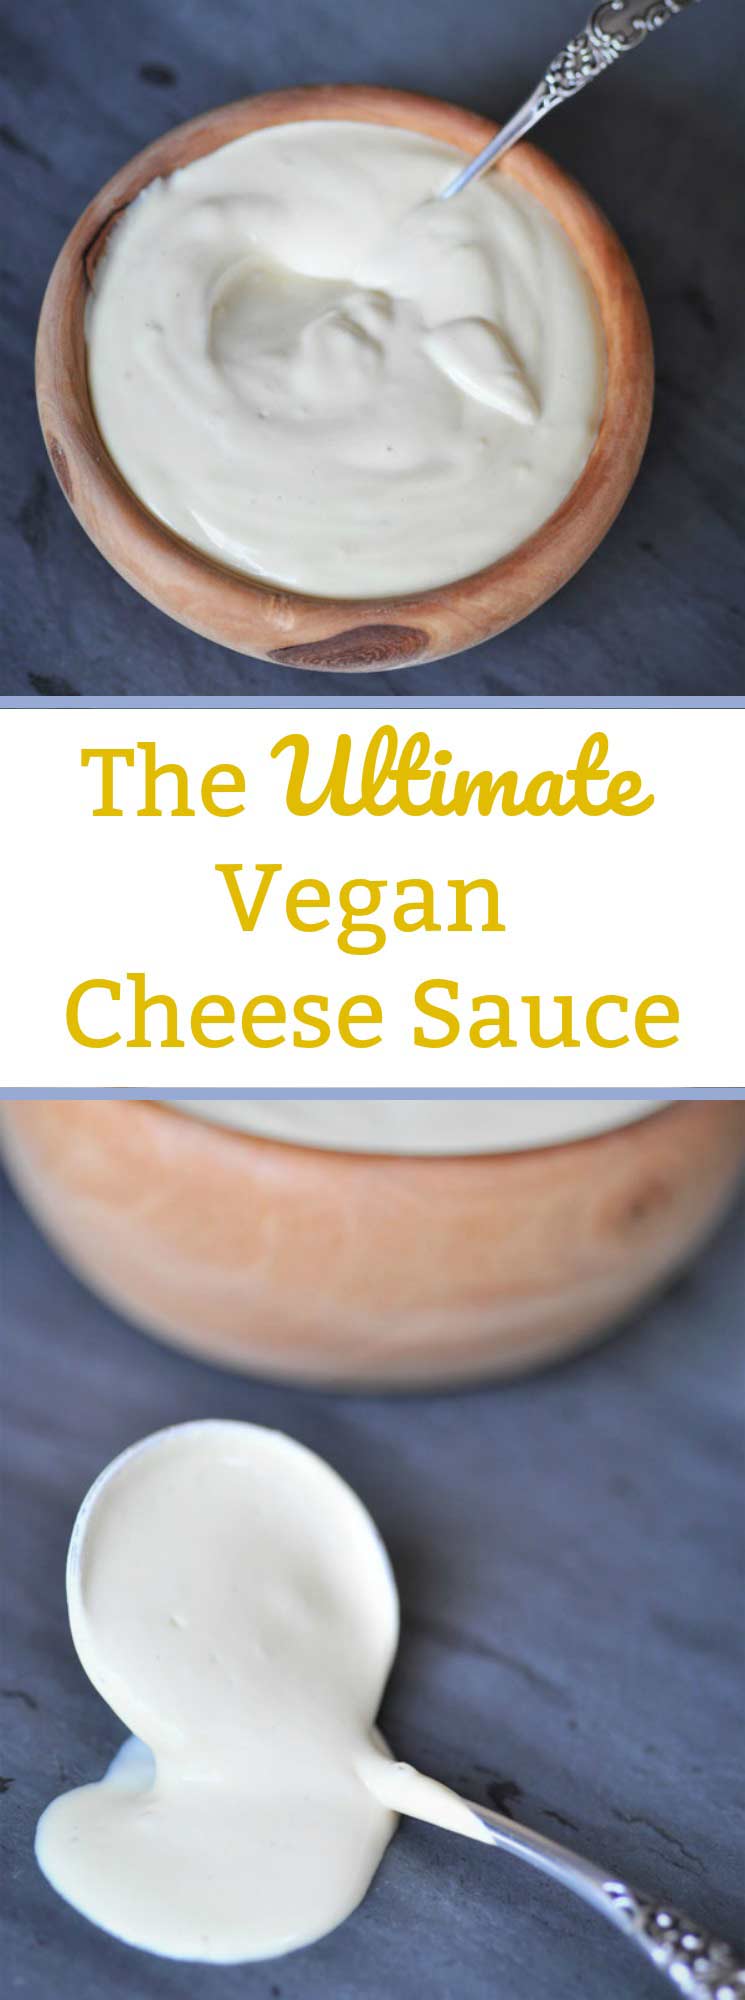 The ultimate vegan cheese sauce is dairy-free, gluten-free, and so creamy, easy to make, and delicious!